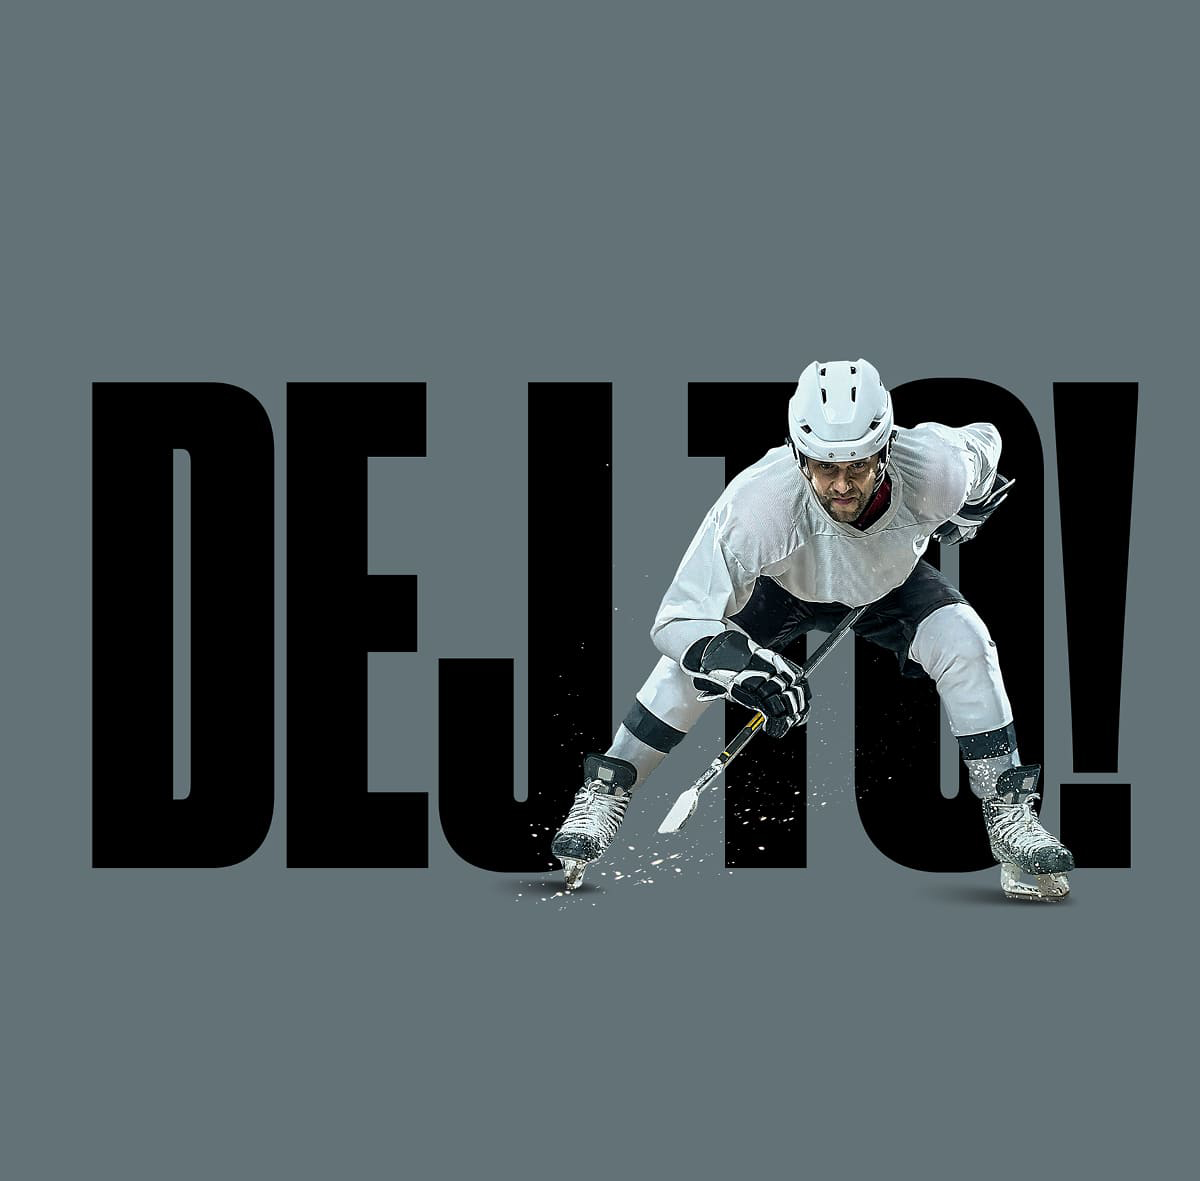 A visual with hockey player for Dej to!